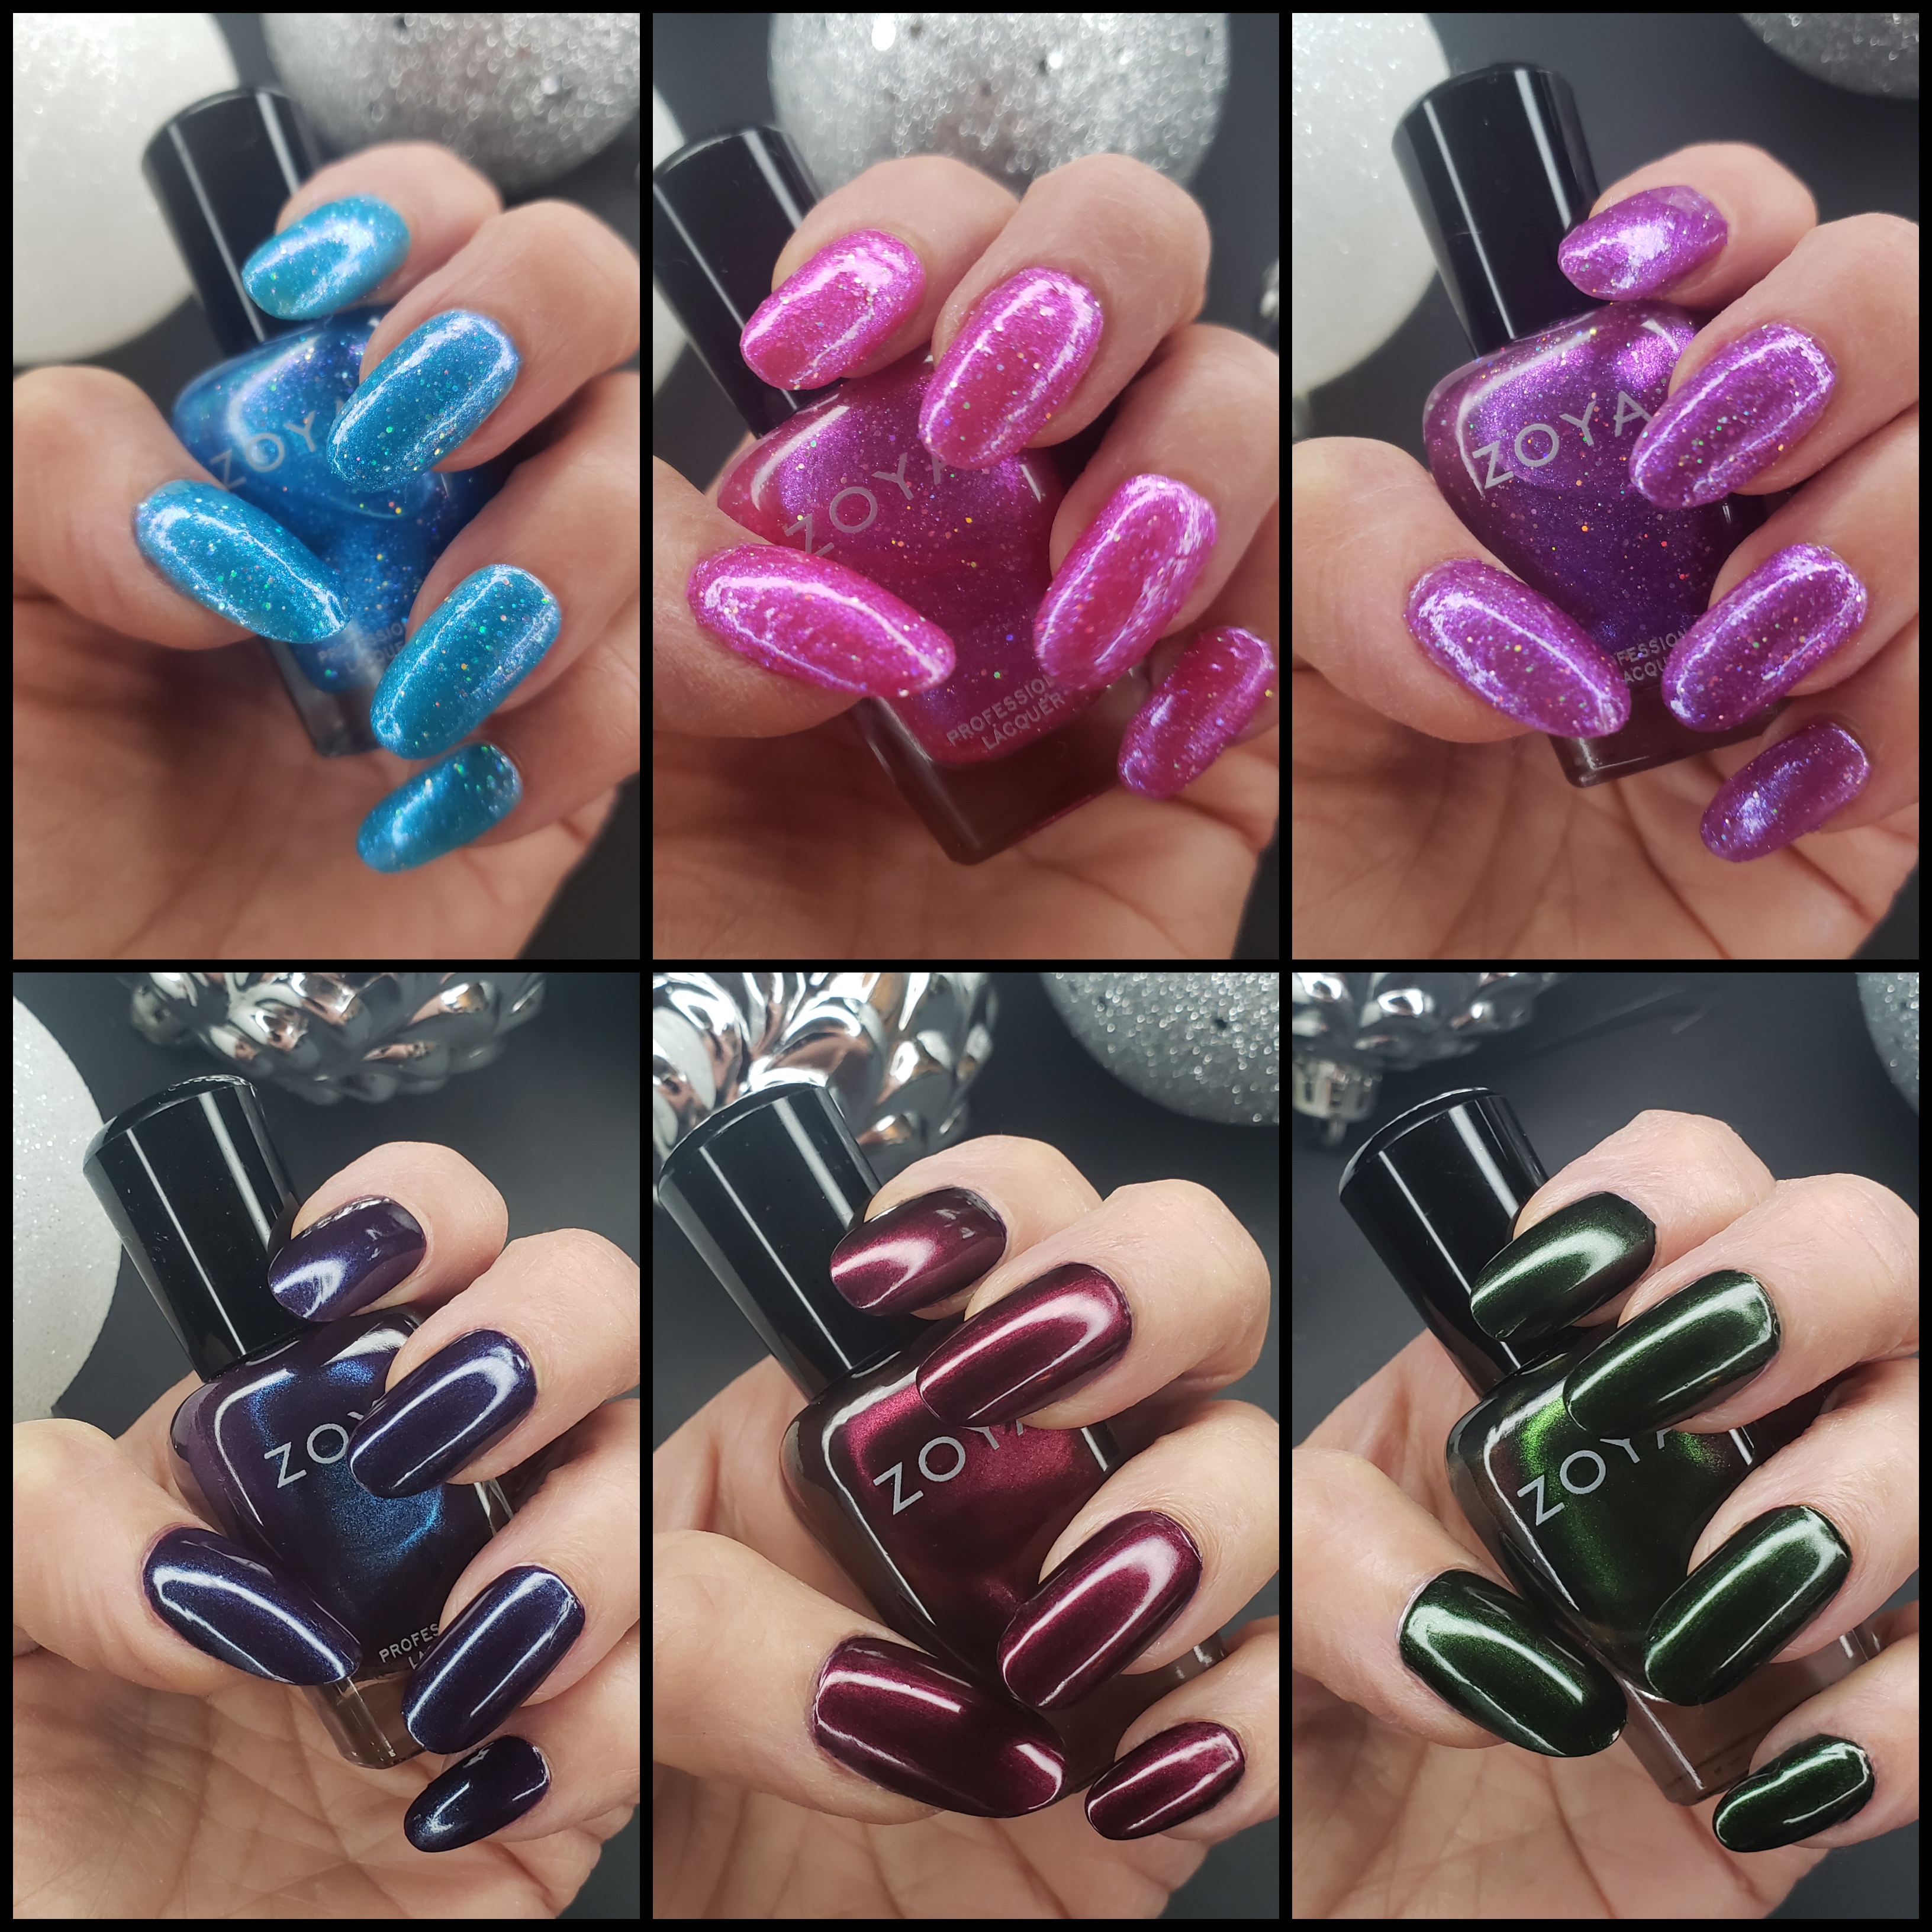 The Polished Hippy: Zoya Winter Holos Collection Swatches and Review